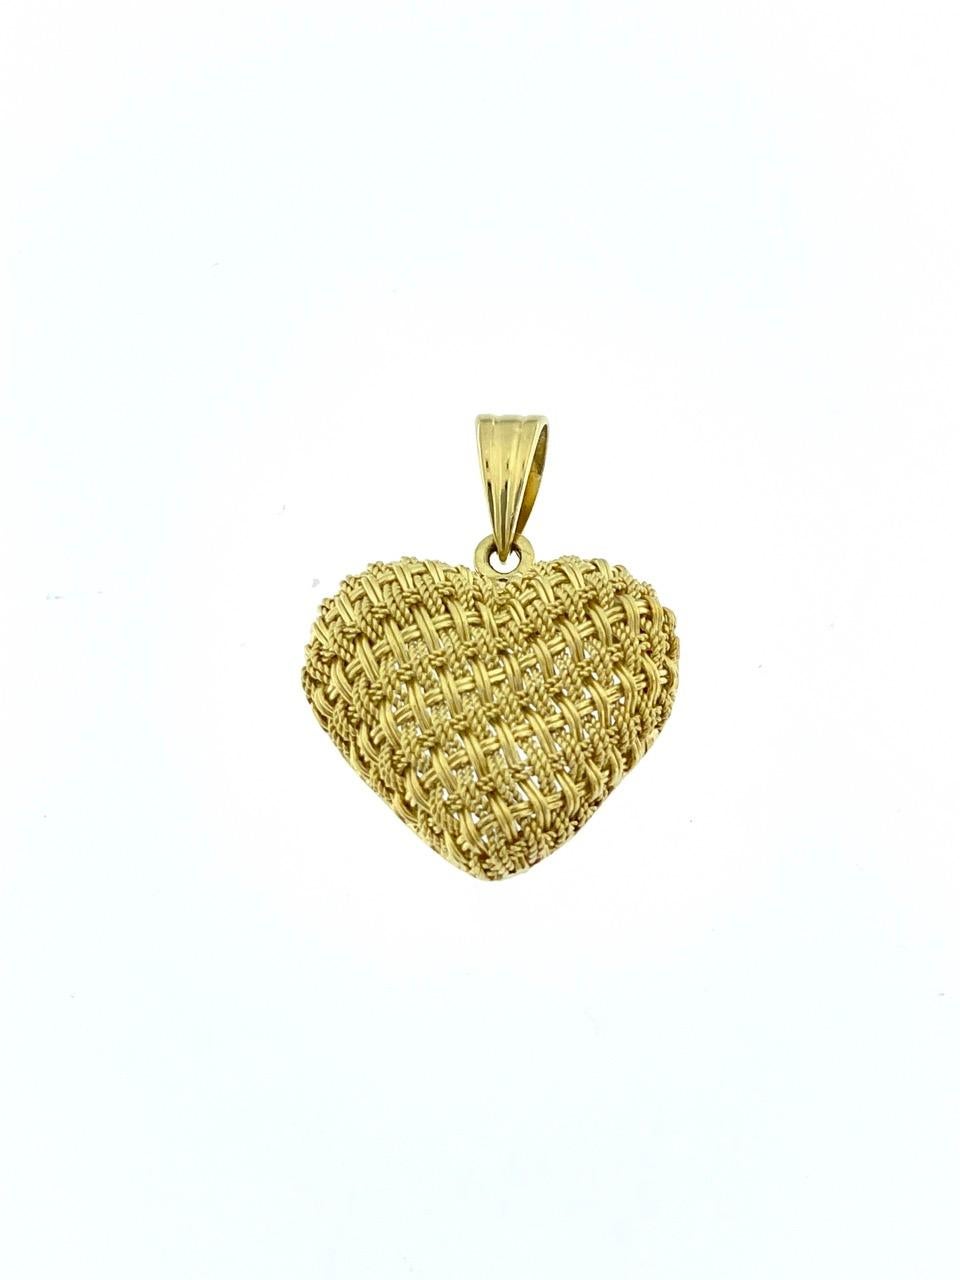 The French Heart Pendant in Yellow Gold with Filigree is a graceful and intricately crafted piece of jewelry that radiates timeless beauty. This pendant features a heart-shaped design, symbolizing love and affection, and is meticulously crafted with